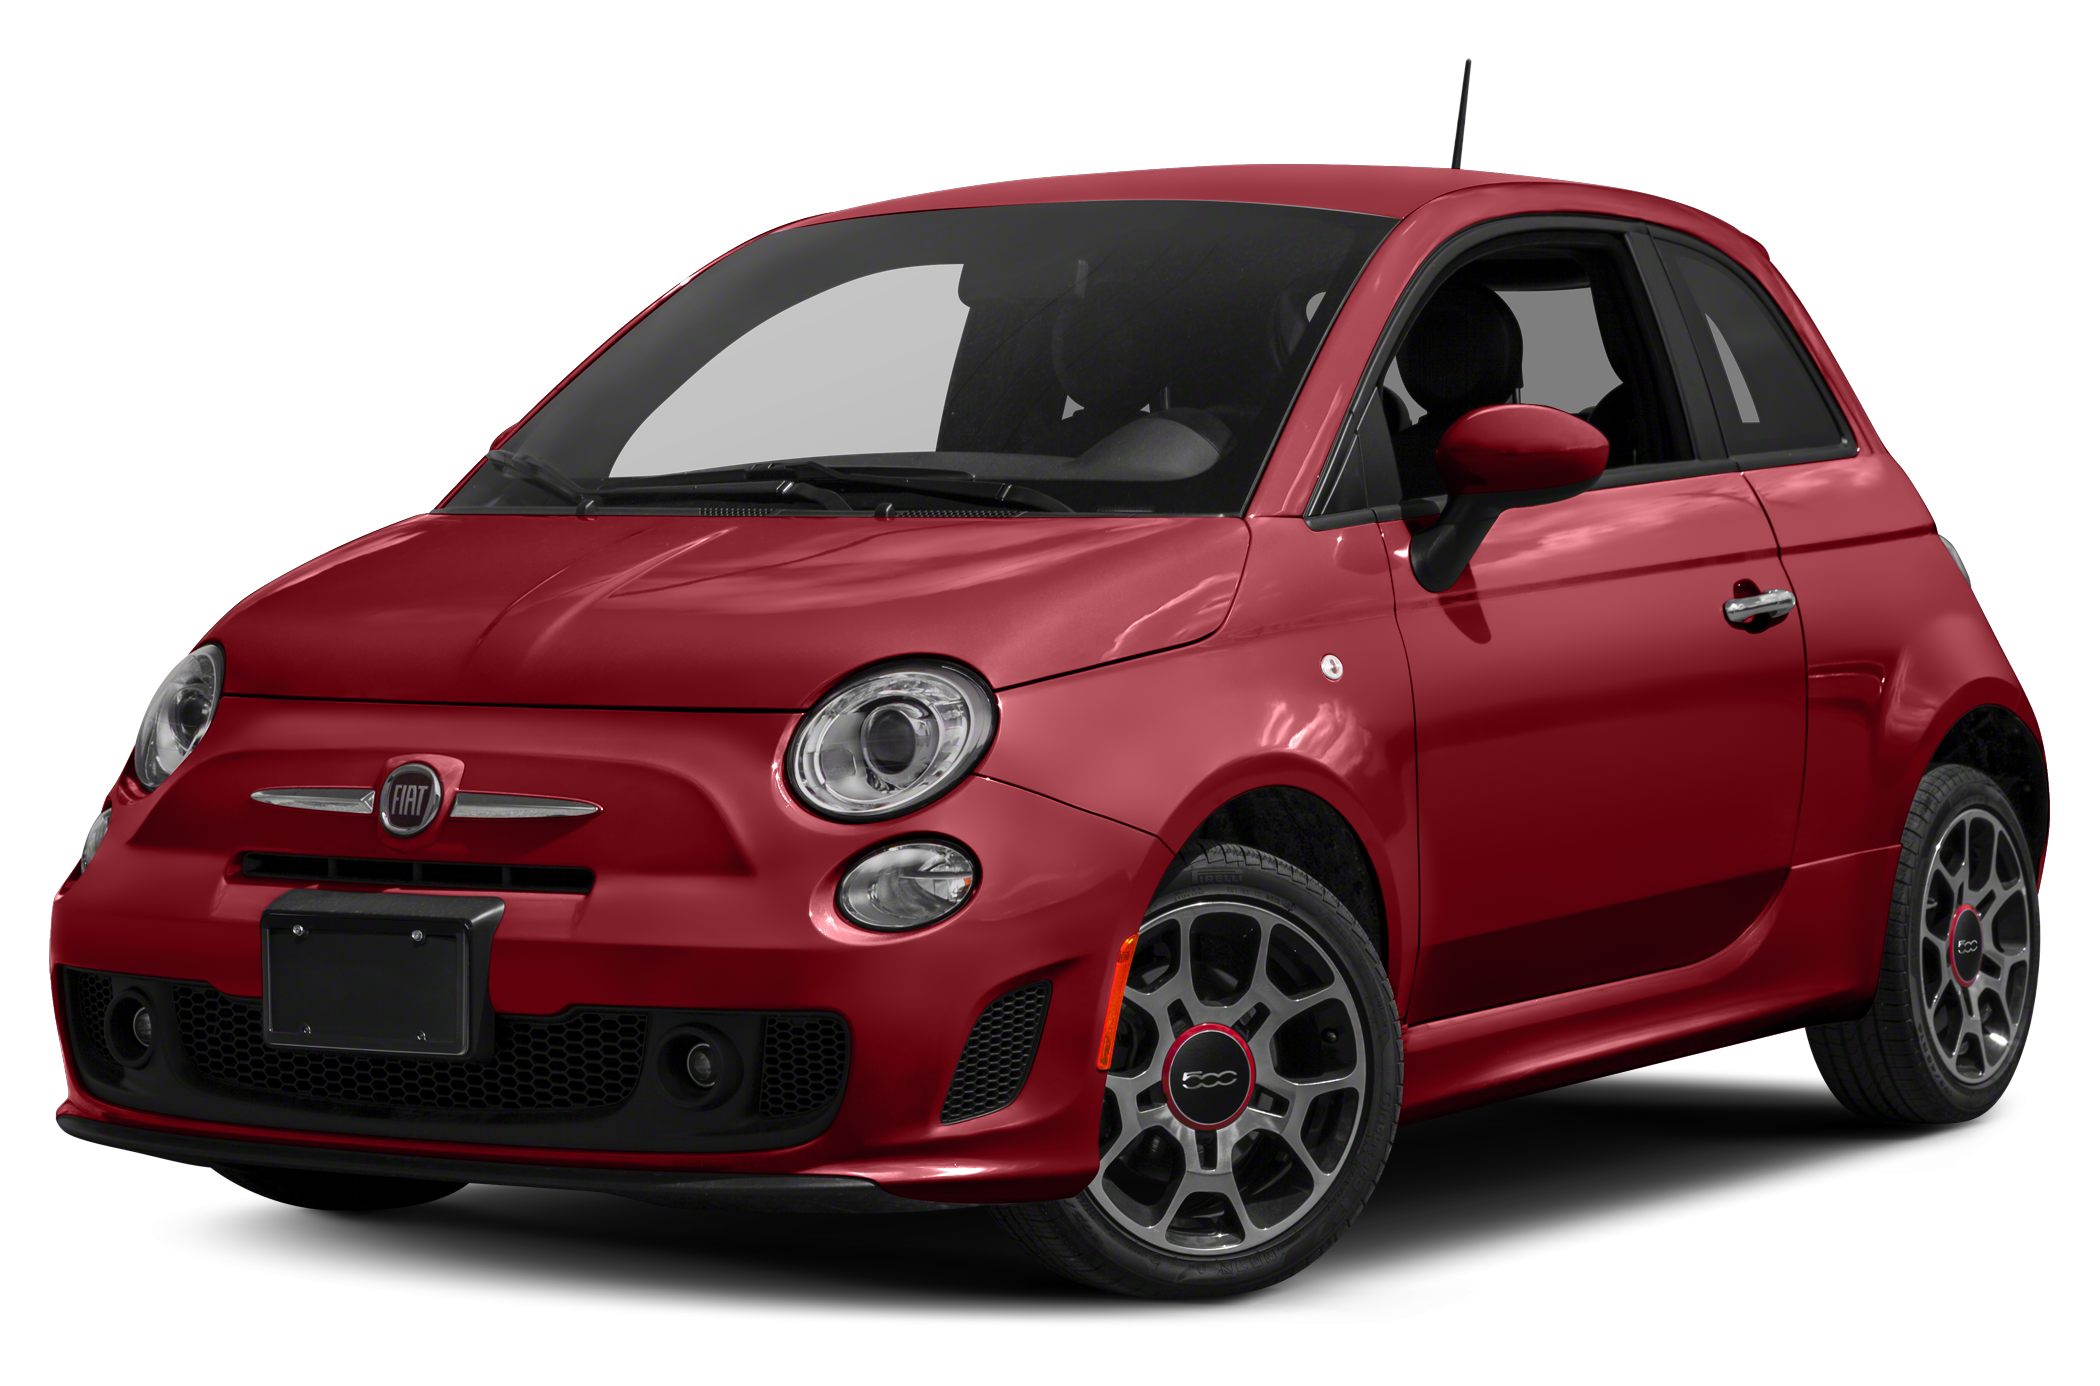 15 Fiat 500 Turbo 2dr Hatchback Specs And Prices